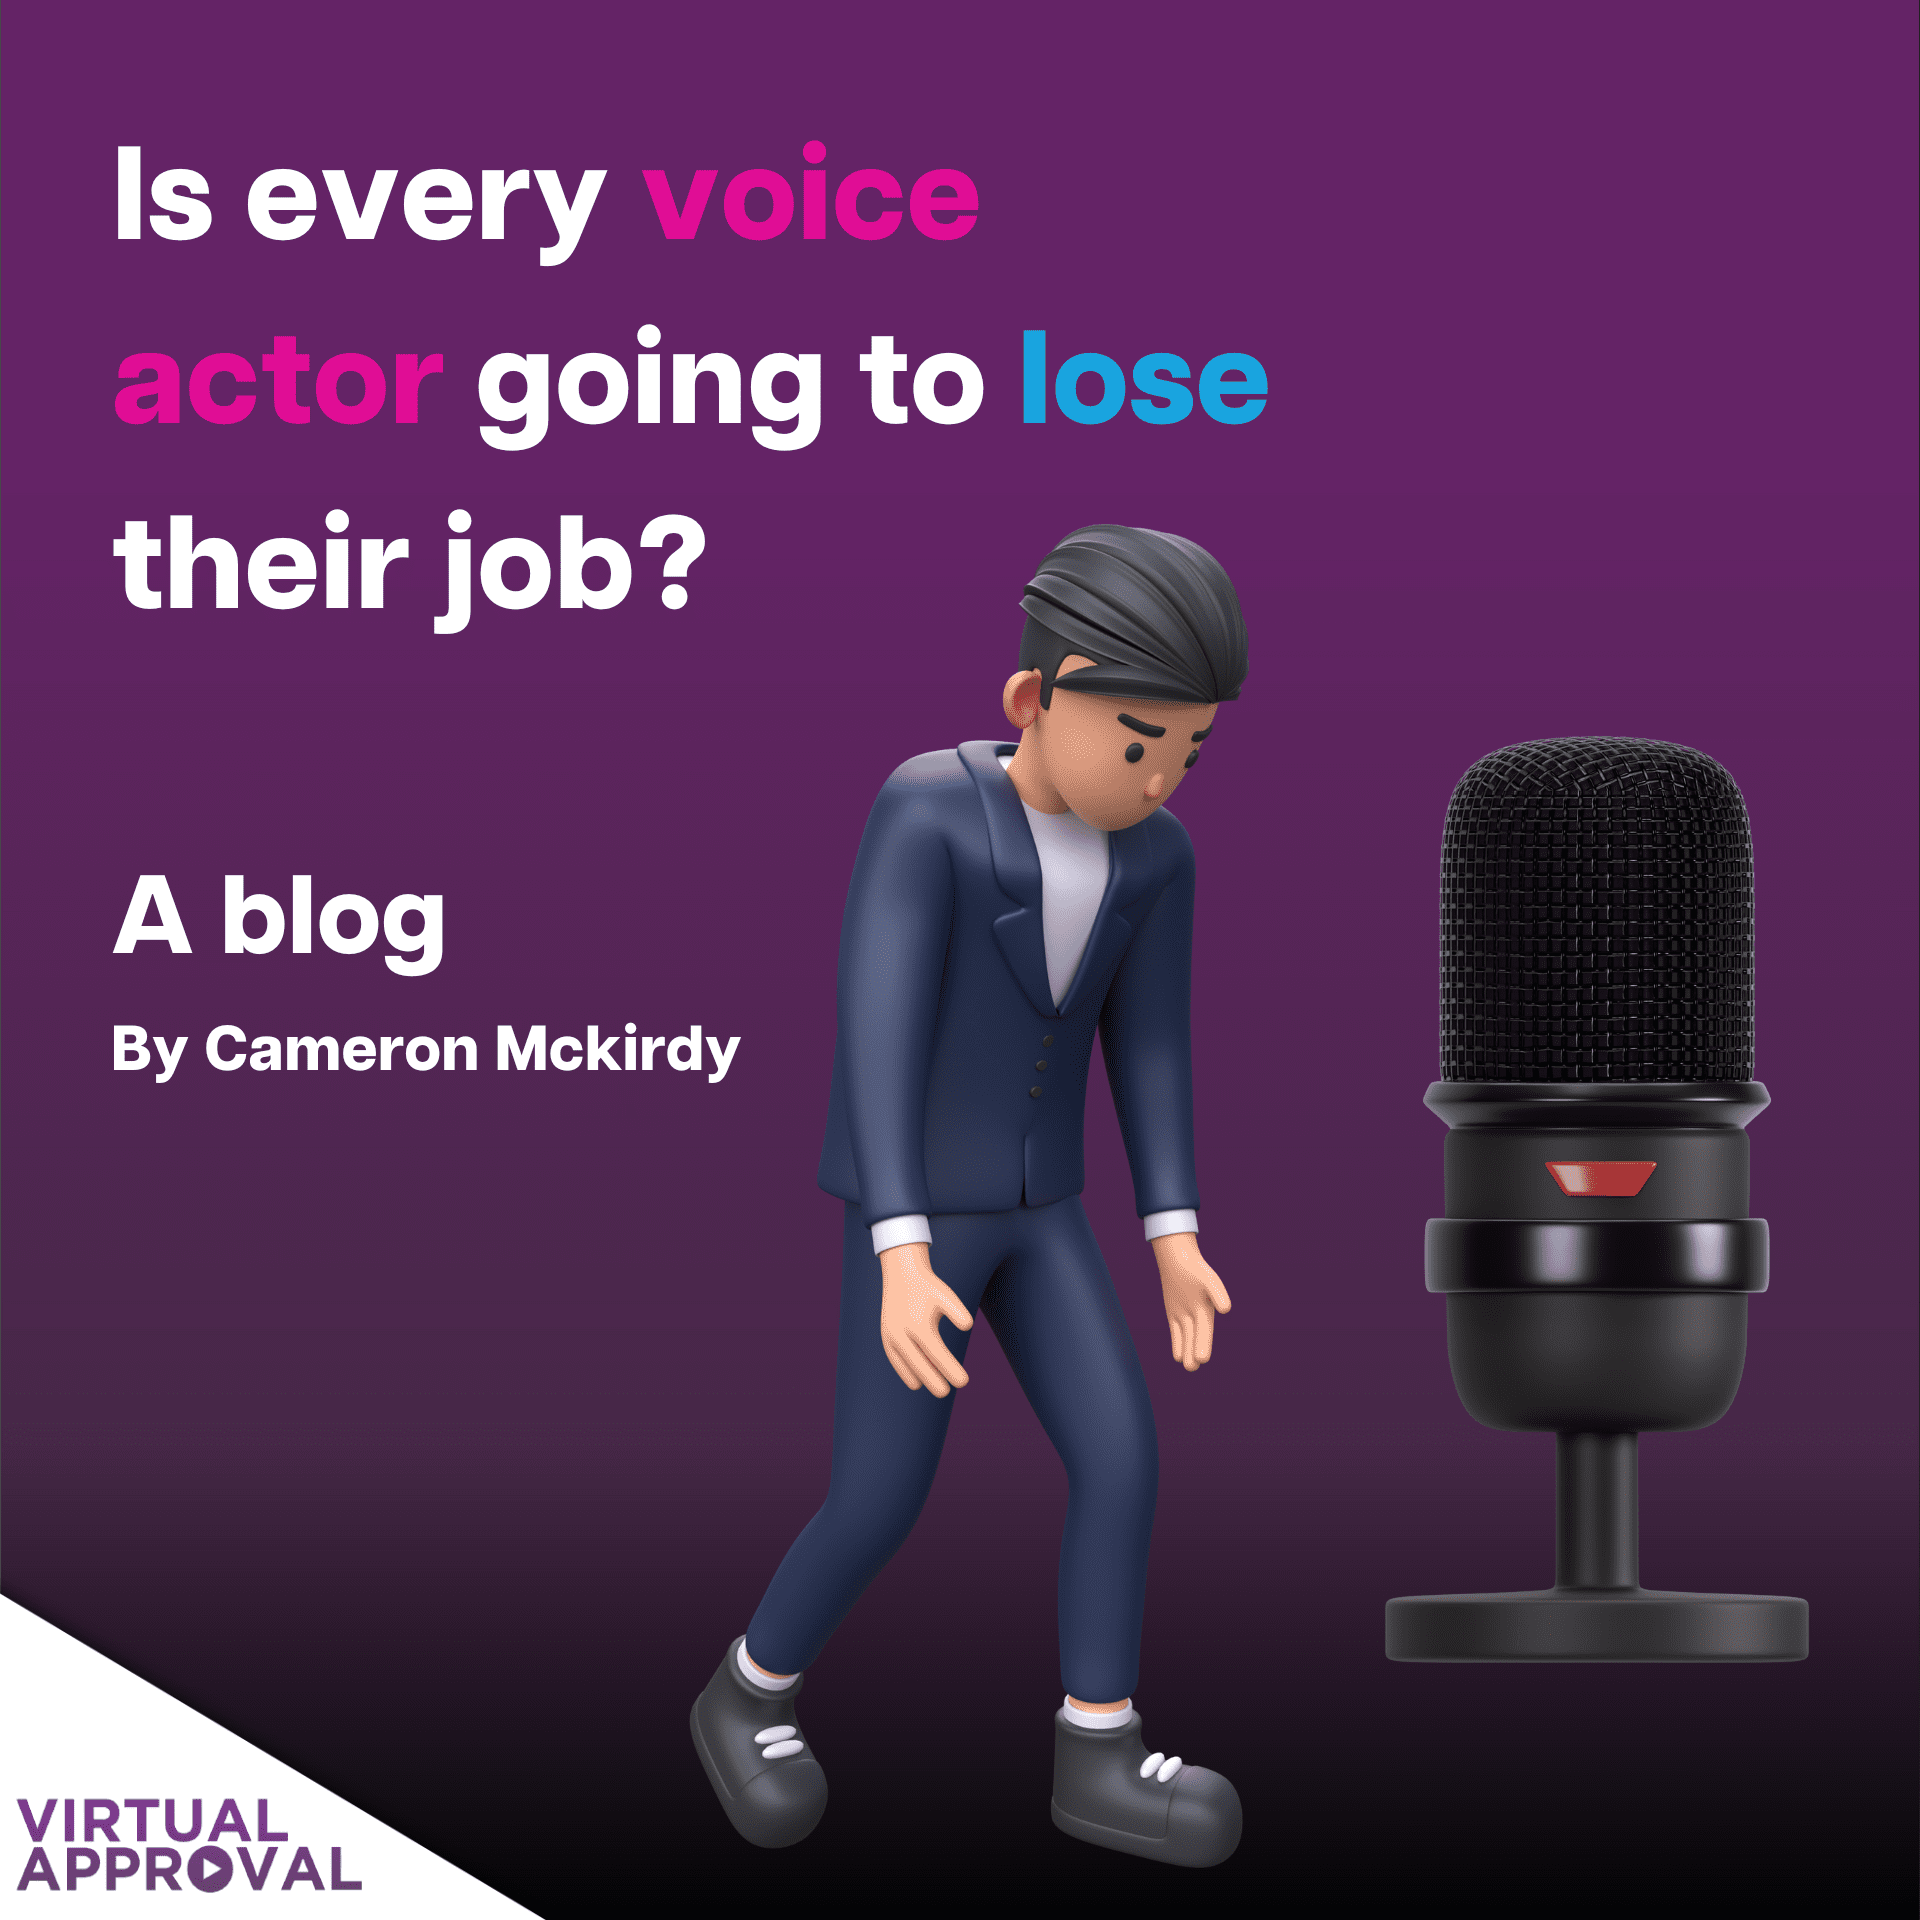 Every voice actor is going to lose their job!